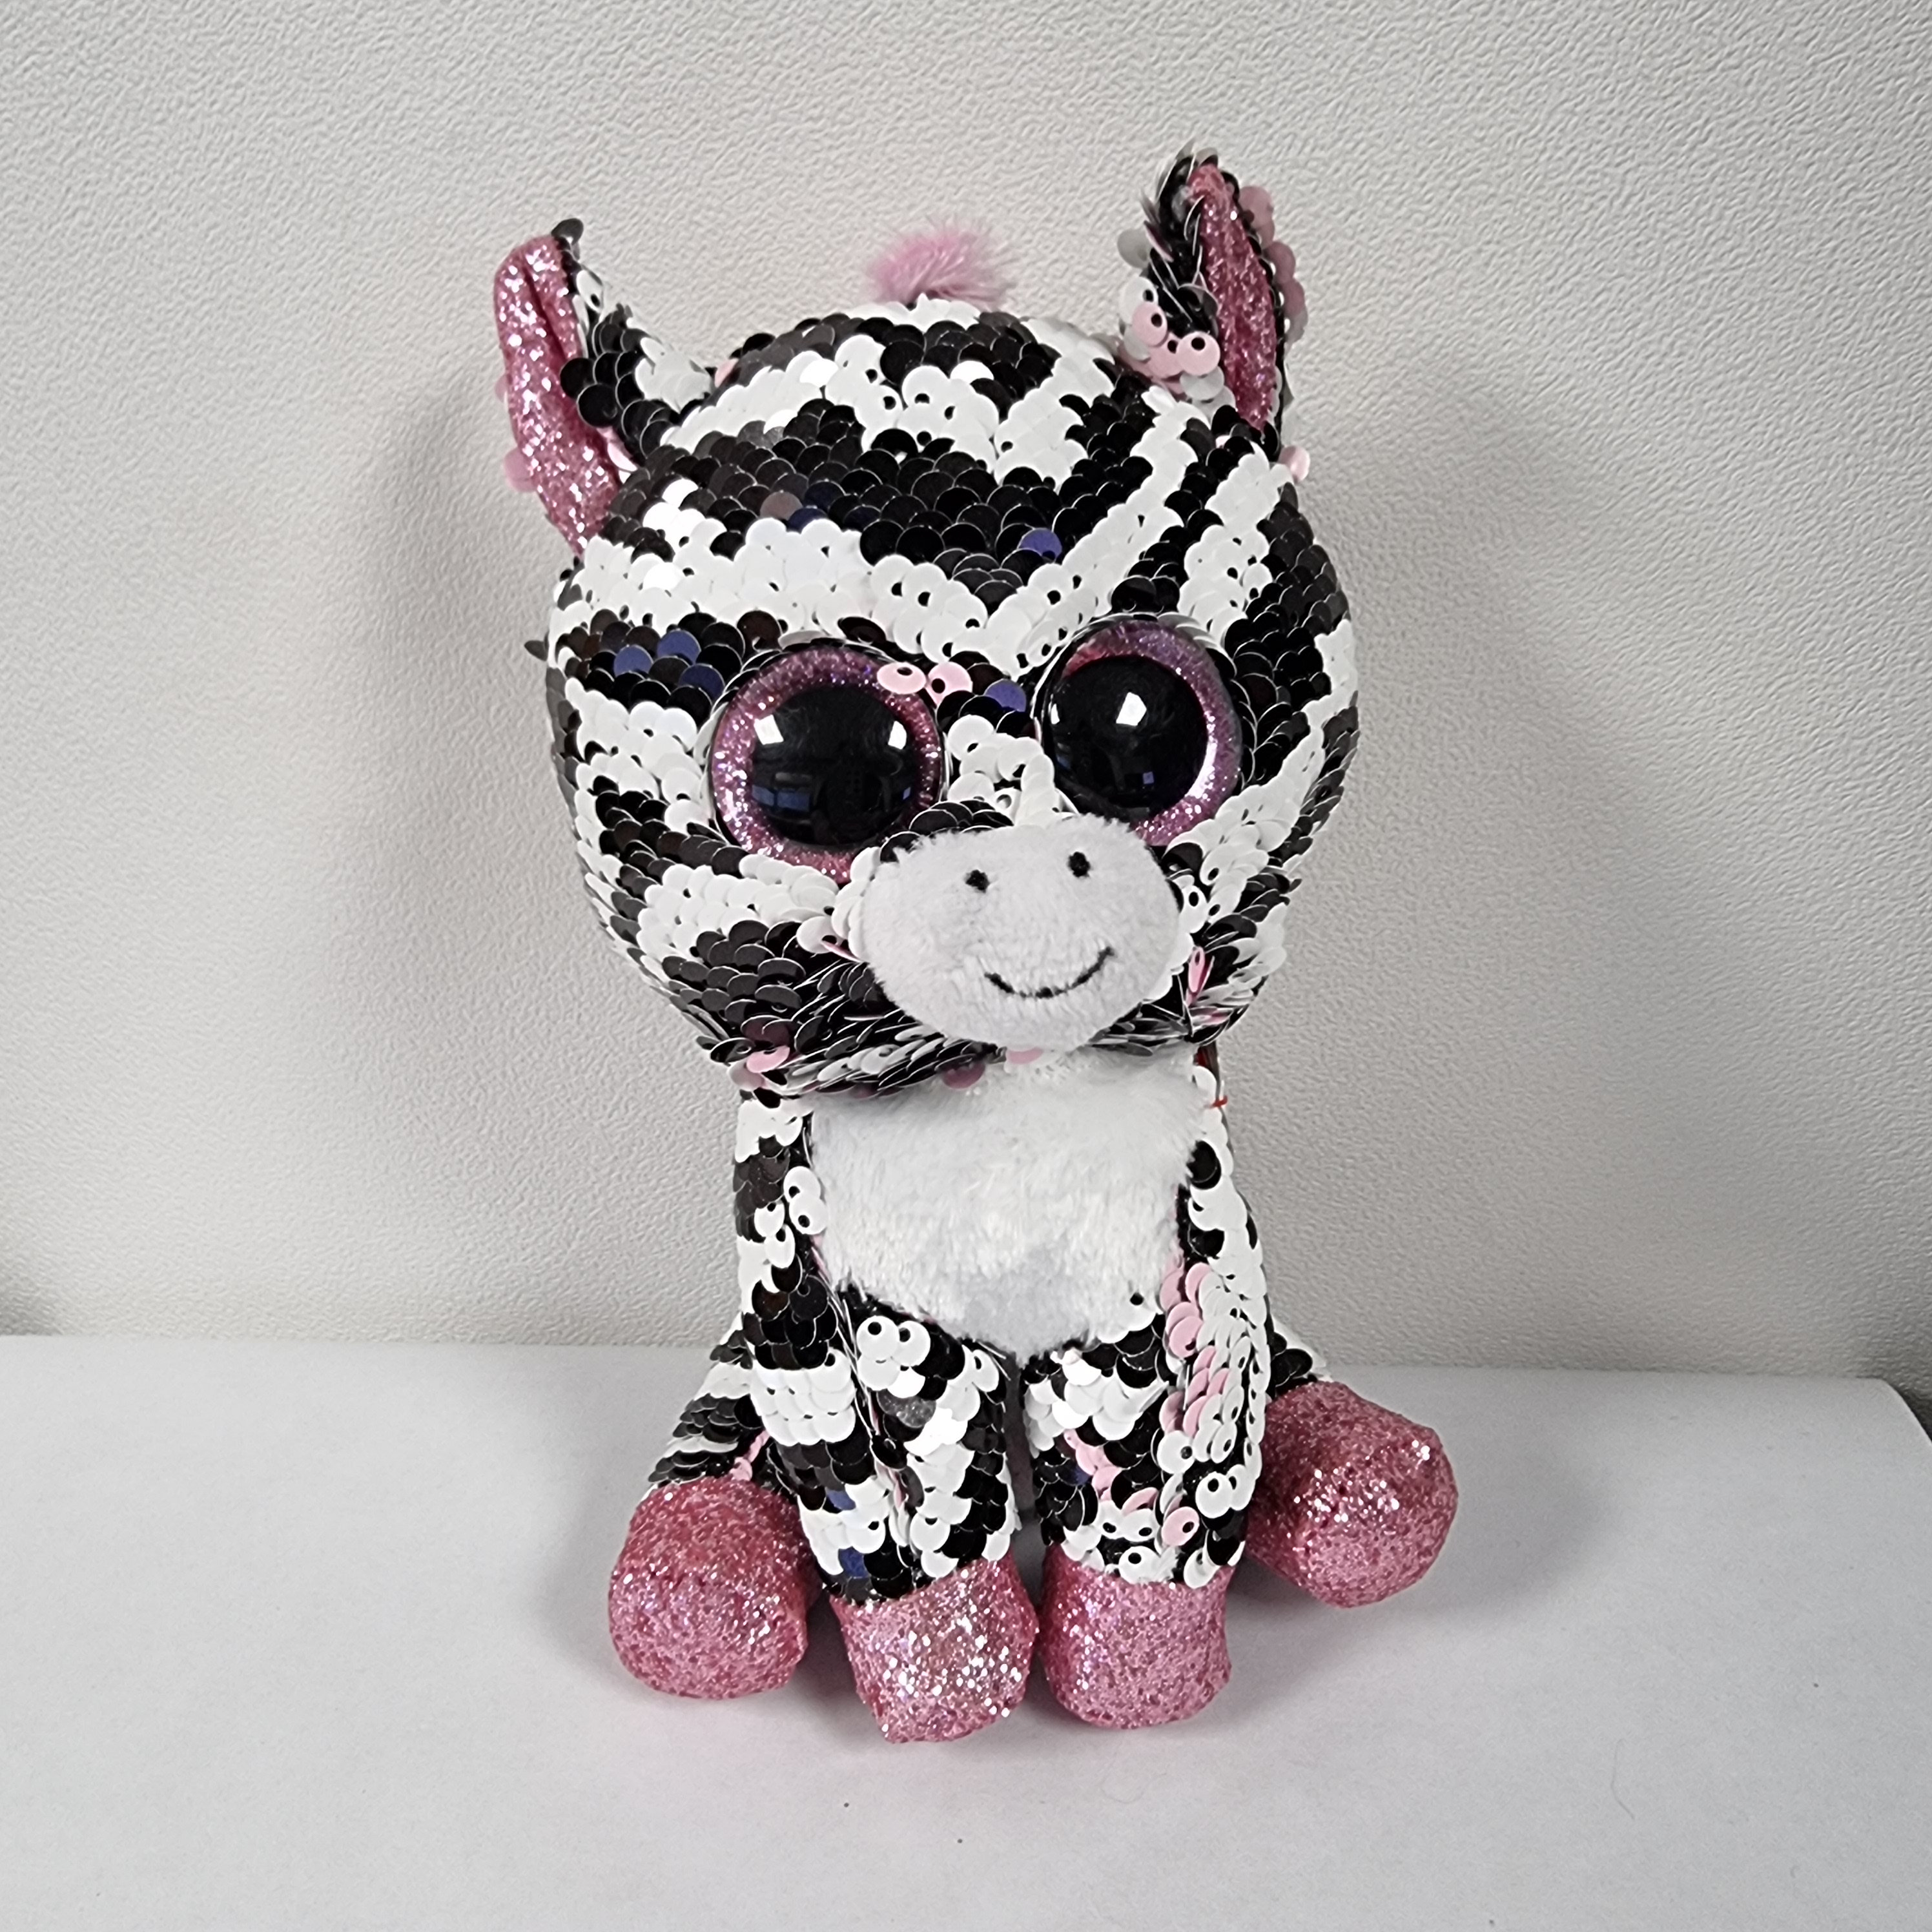 TY Beanie Boo Plush - Zoey the Zebra 15cm (Color may vary)